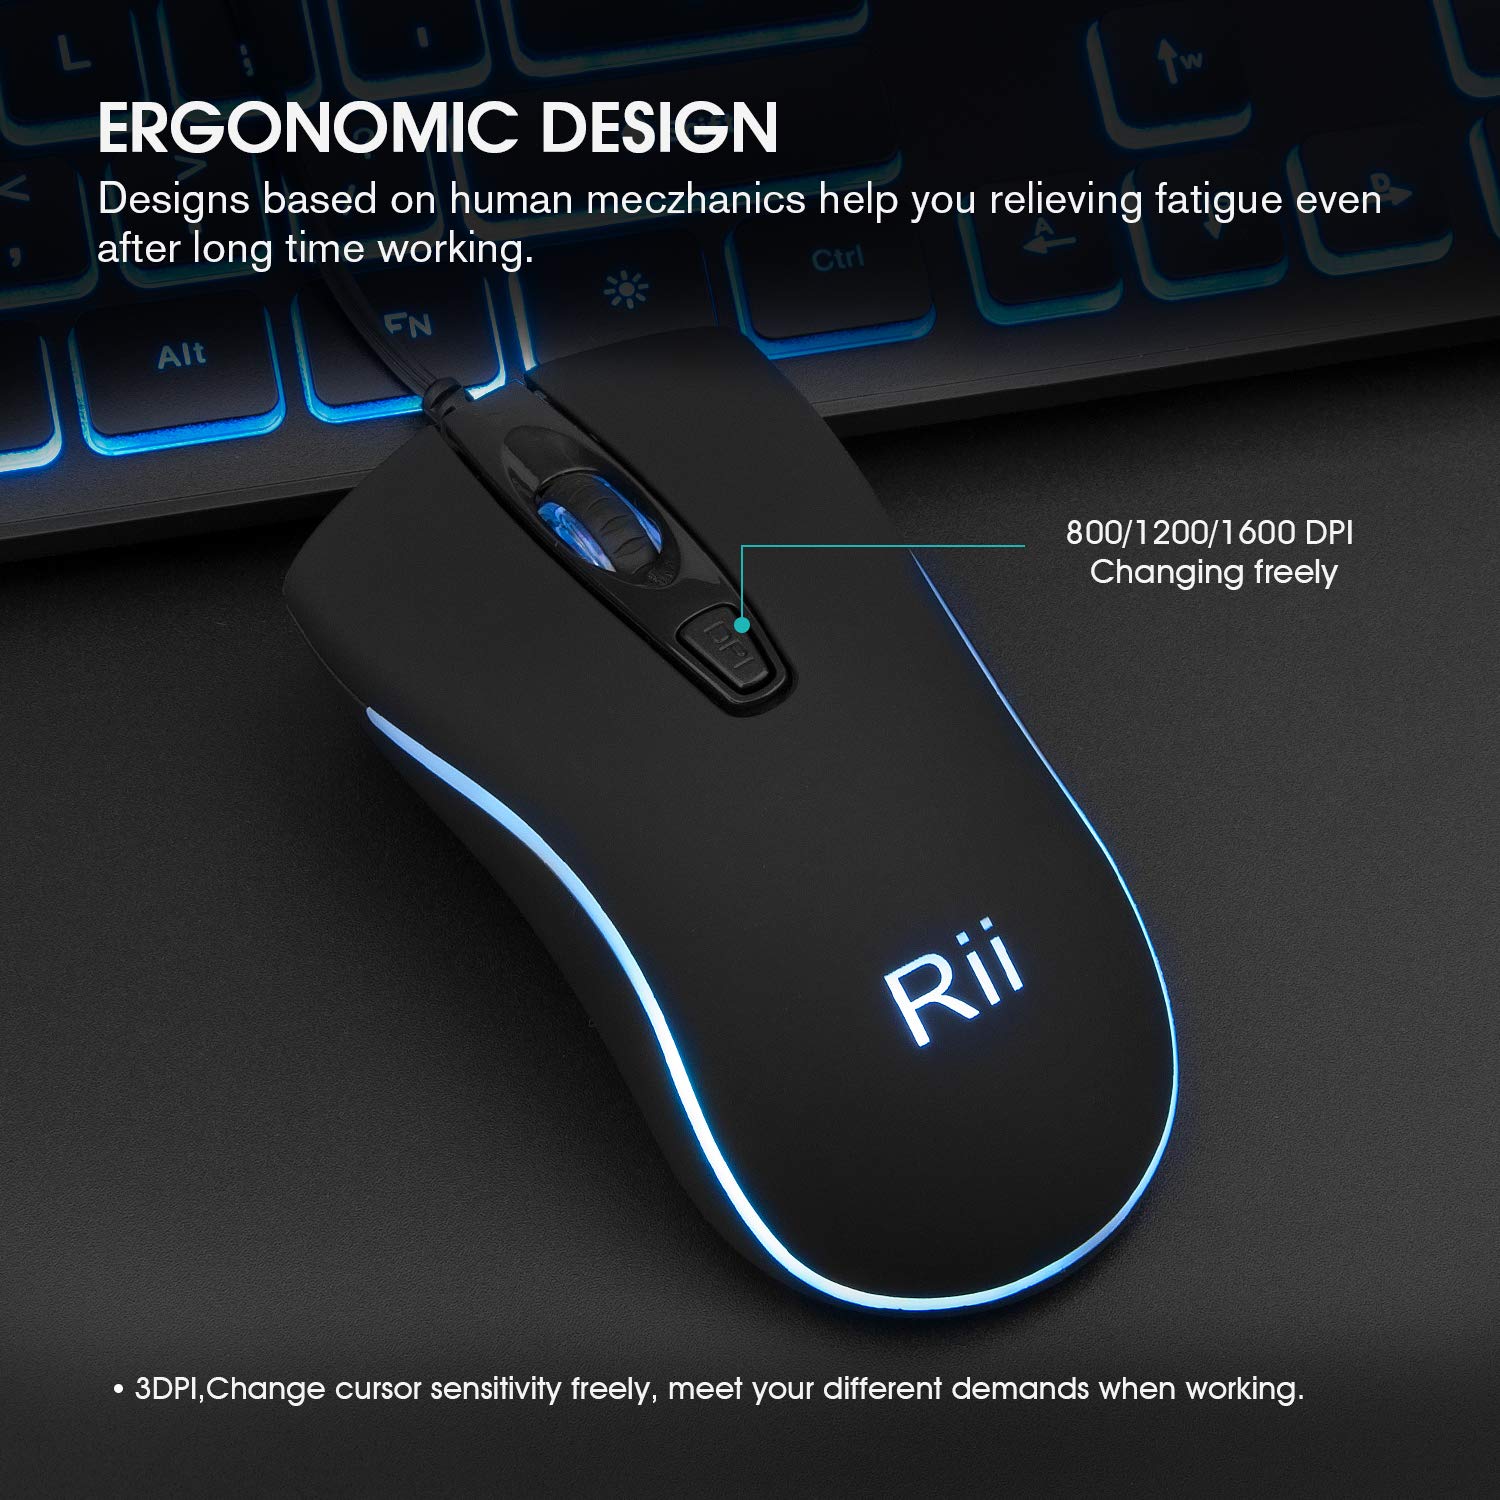 Rii Three Colors Backlit Business Keyboard,Gaming Keyboard and Mouse Combo,USB Wired Keyboard,RGB Optical Mouse for Gaming,Business Office